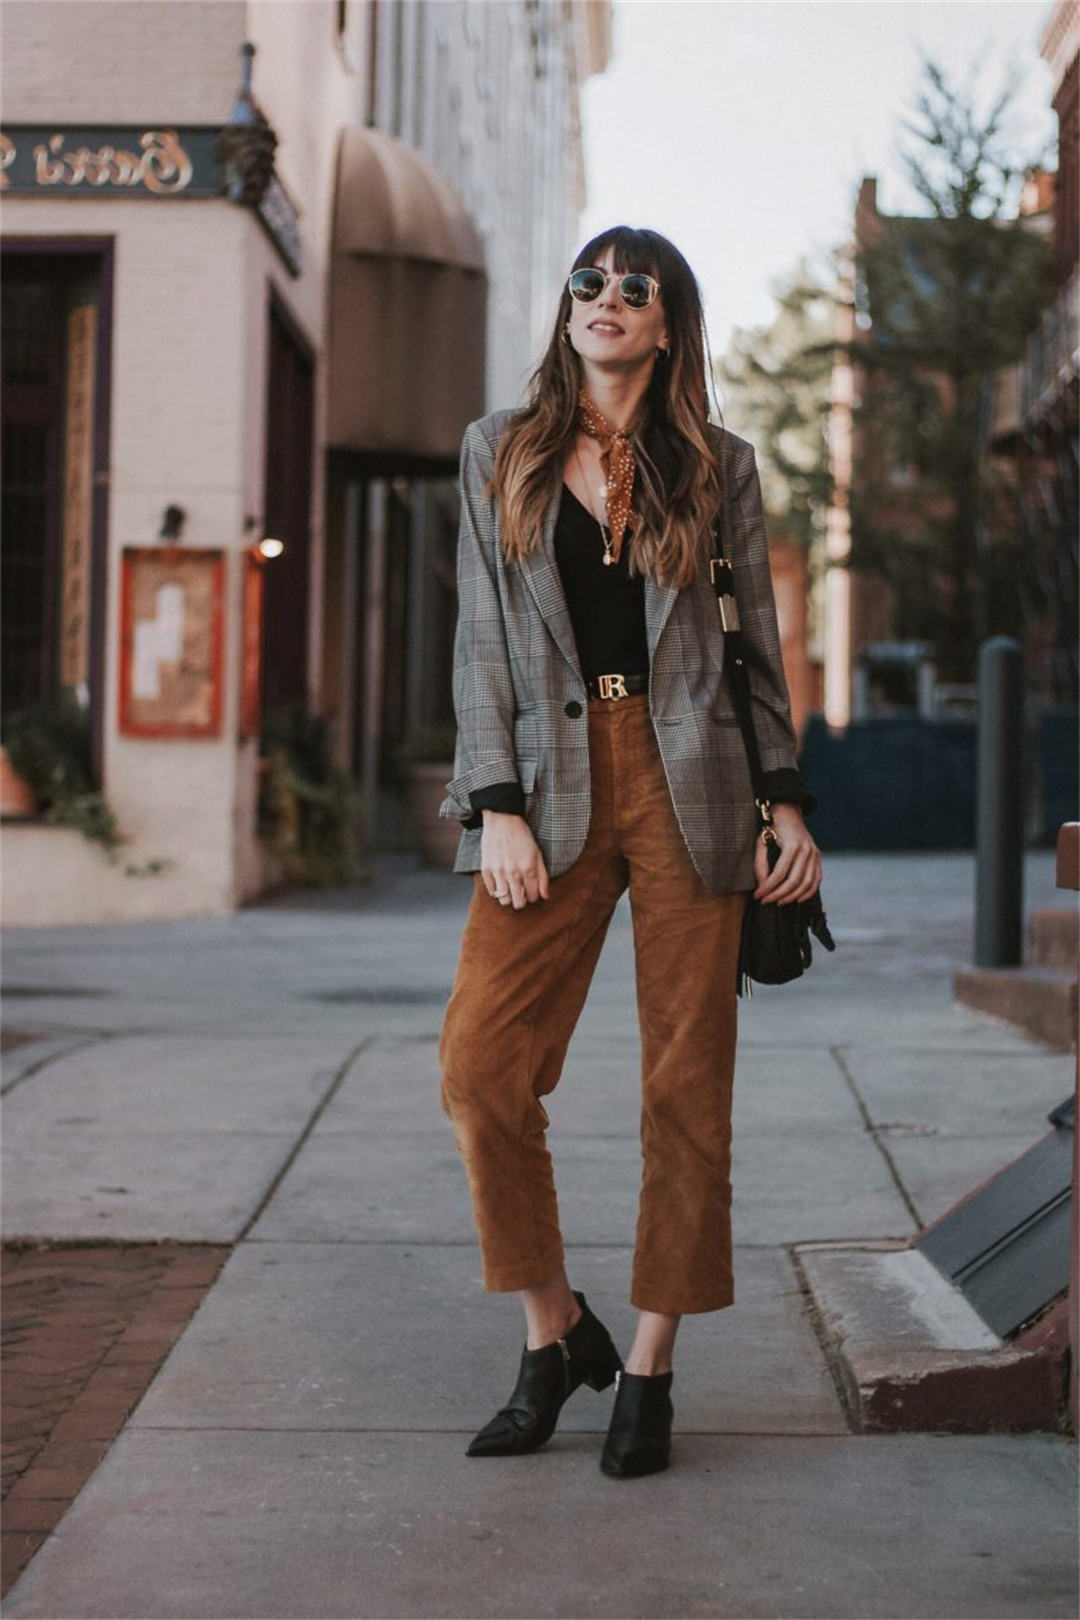 40 Corduroy Pants Outfit Ideas for Women - Her Style Code